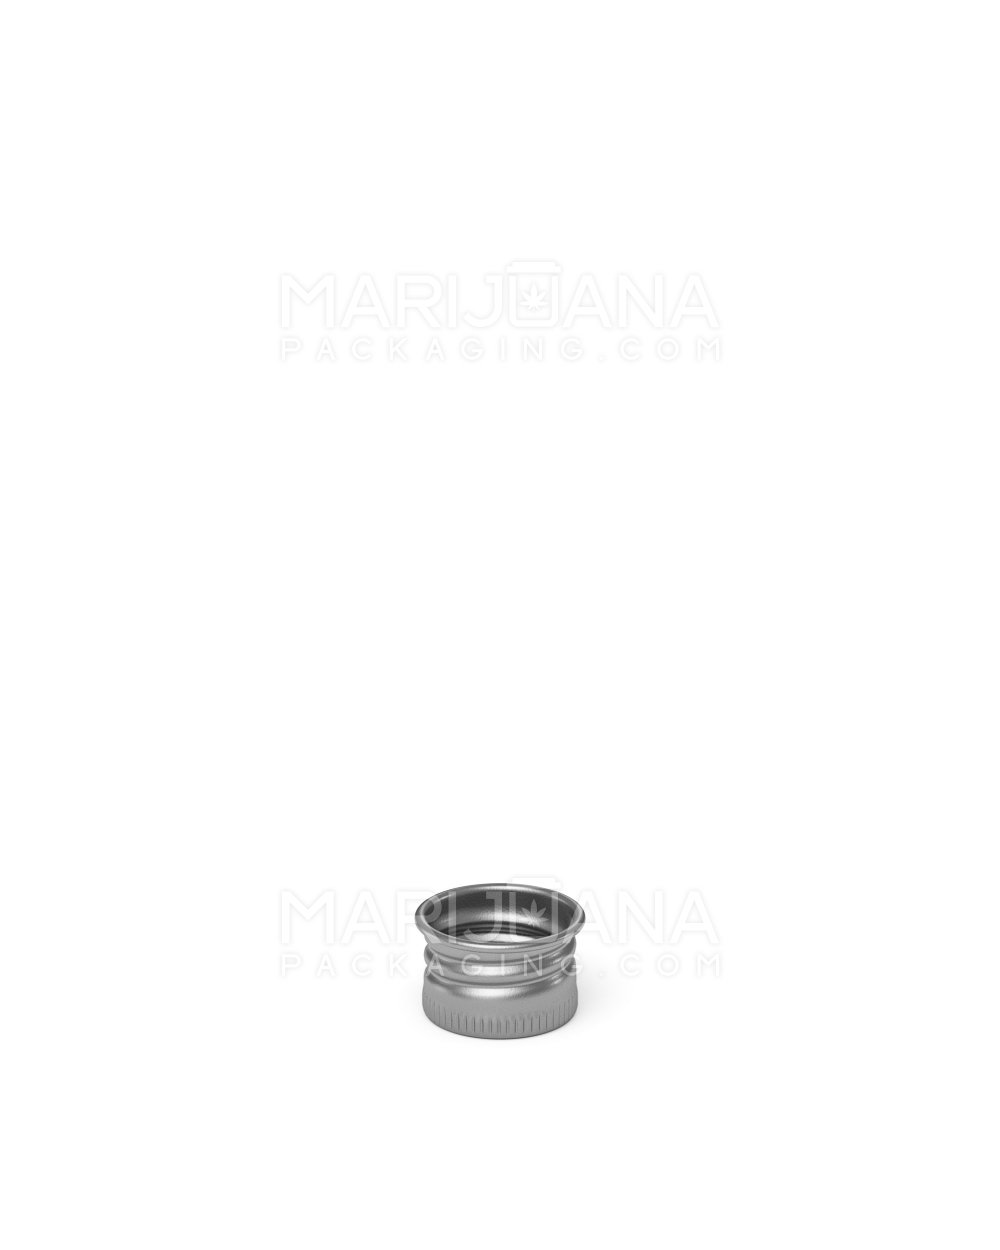 Ribbed Screw Top Metal Caps w/ Foam Liner | 18mm - Glossy Silver - 400 Count - 4